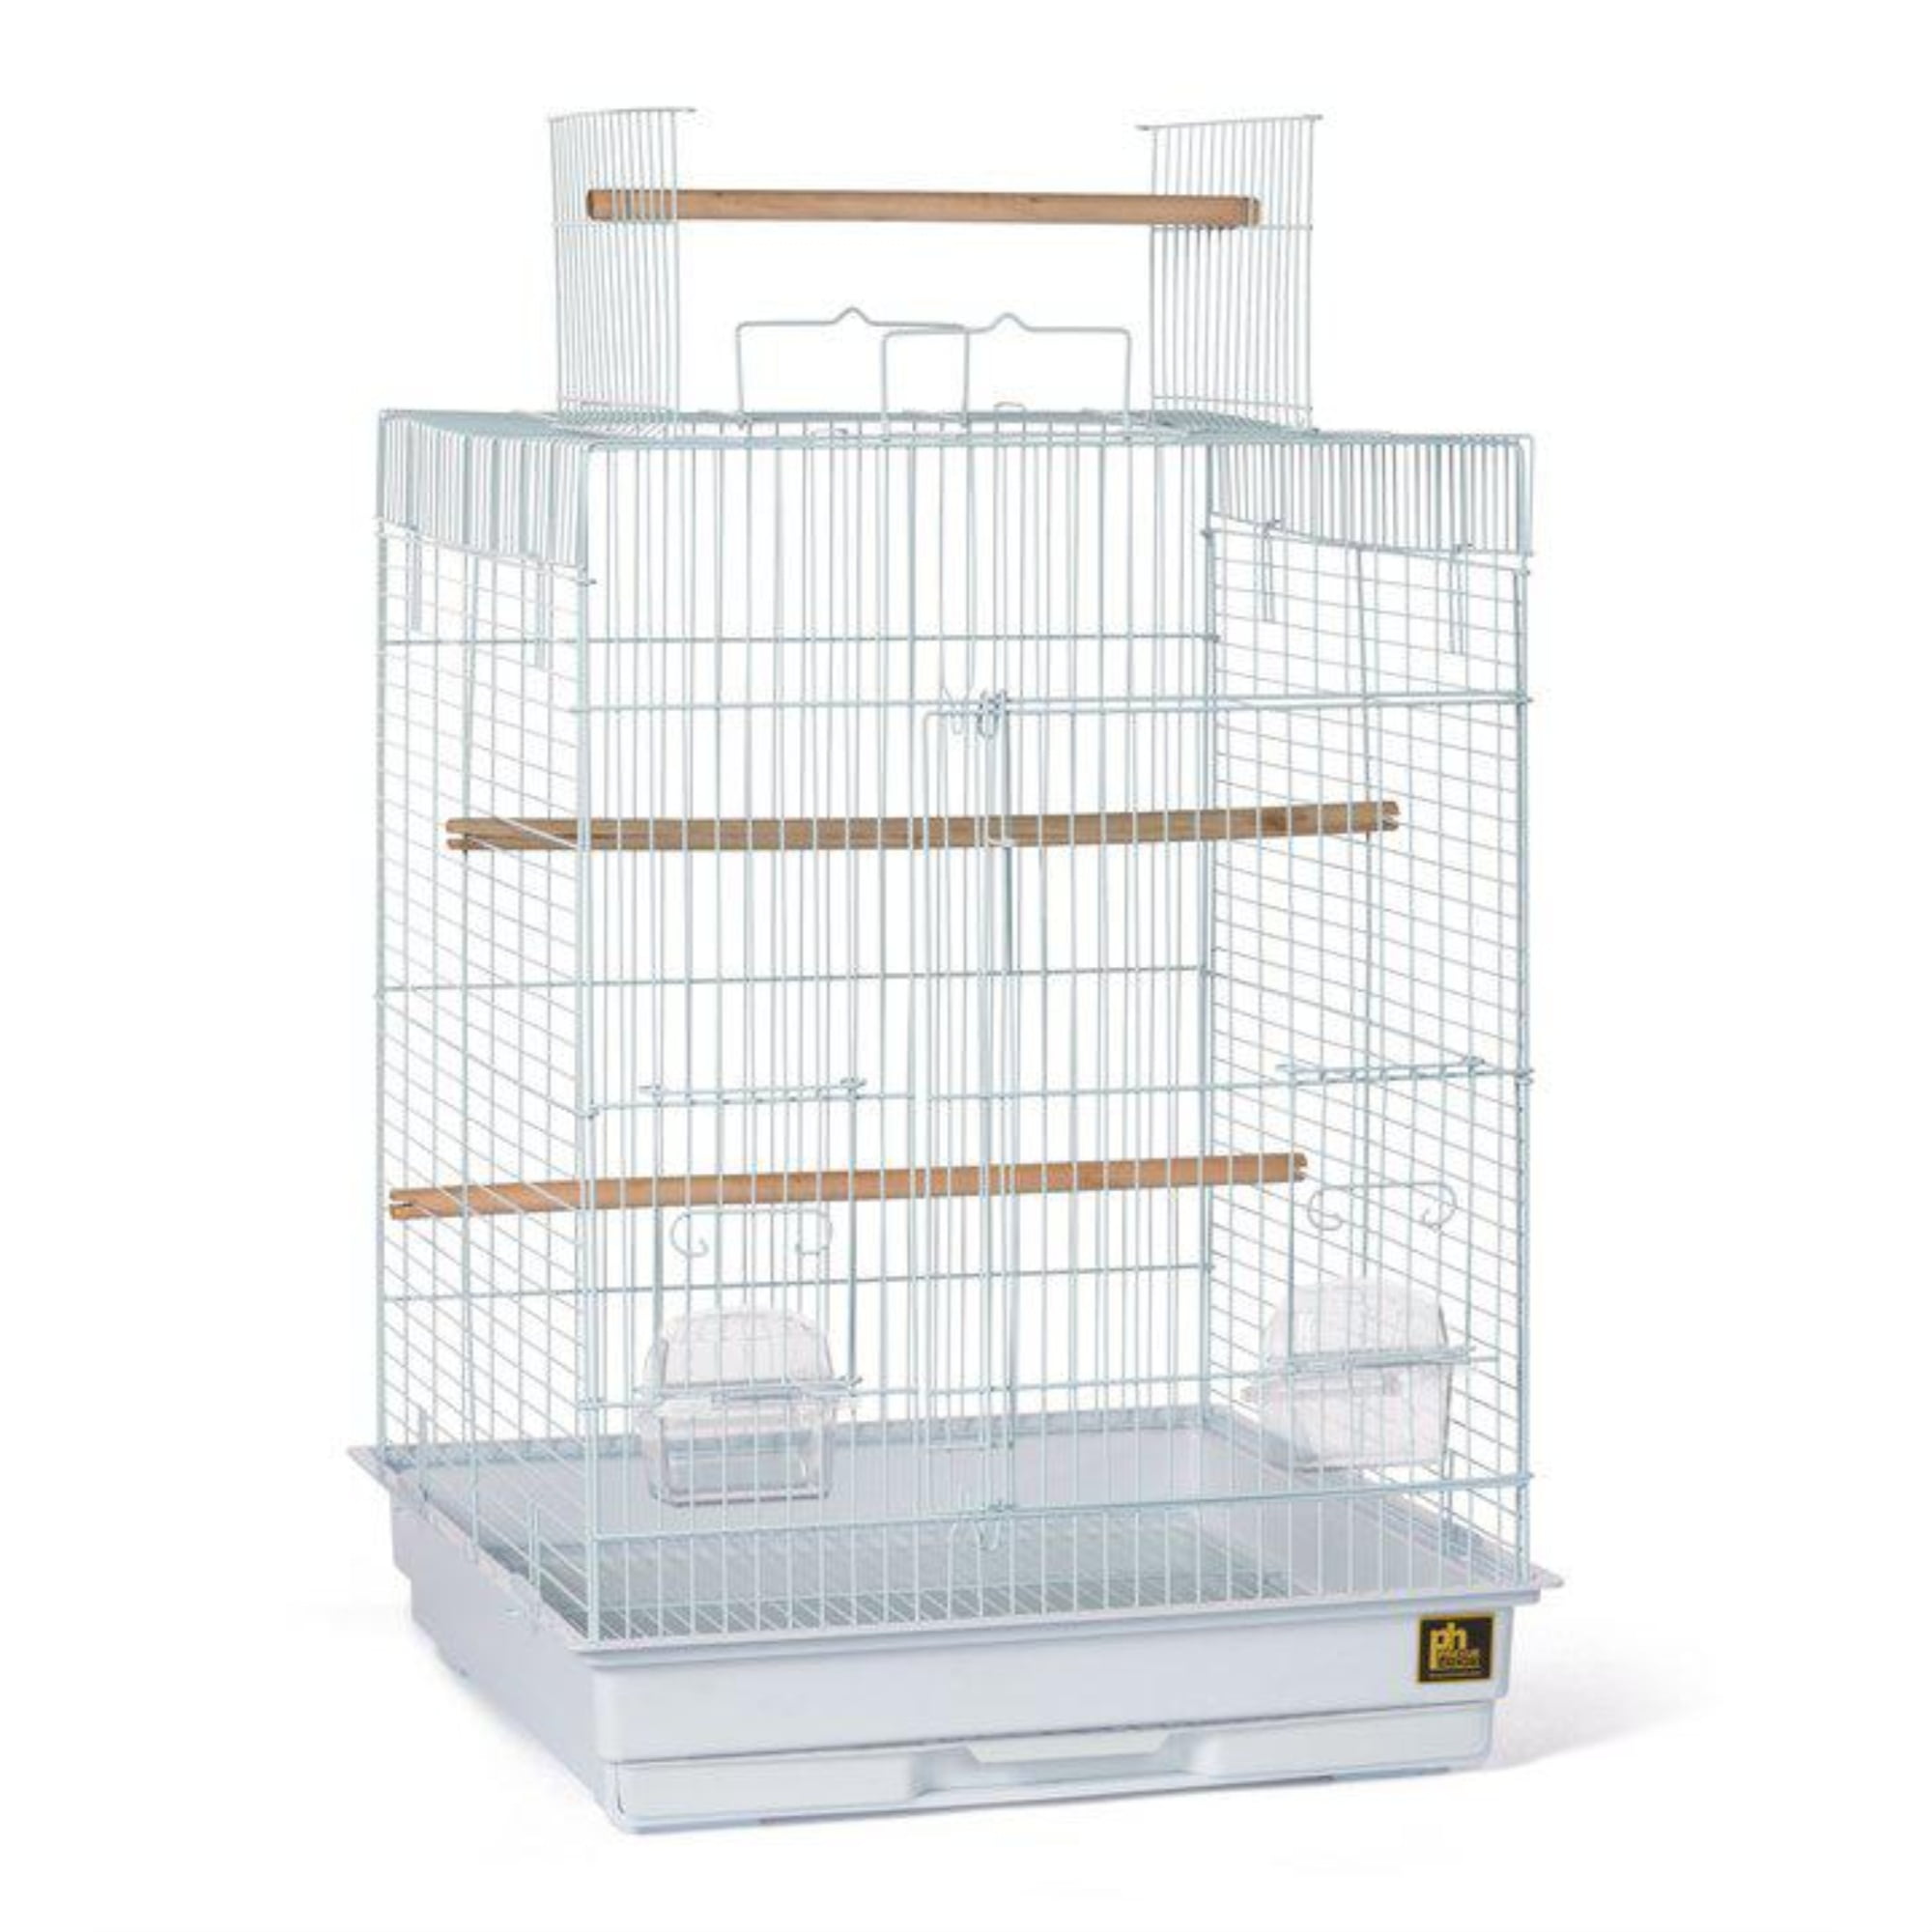 63" New Large Canary Parakeet Cockatiel LoveBird Finch Bird Cage Stand WTE 444 